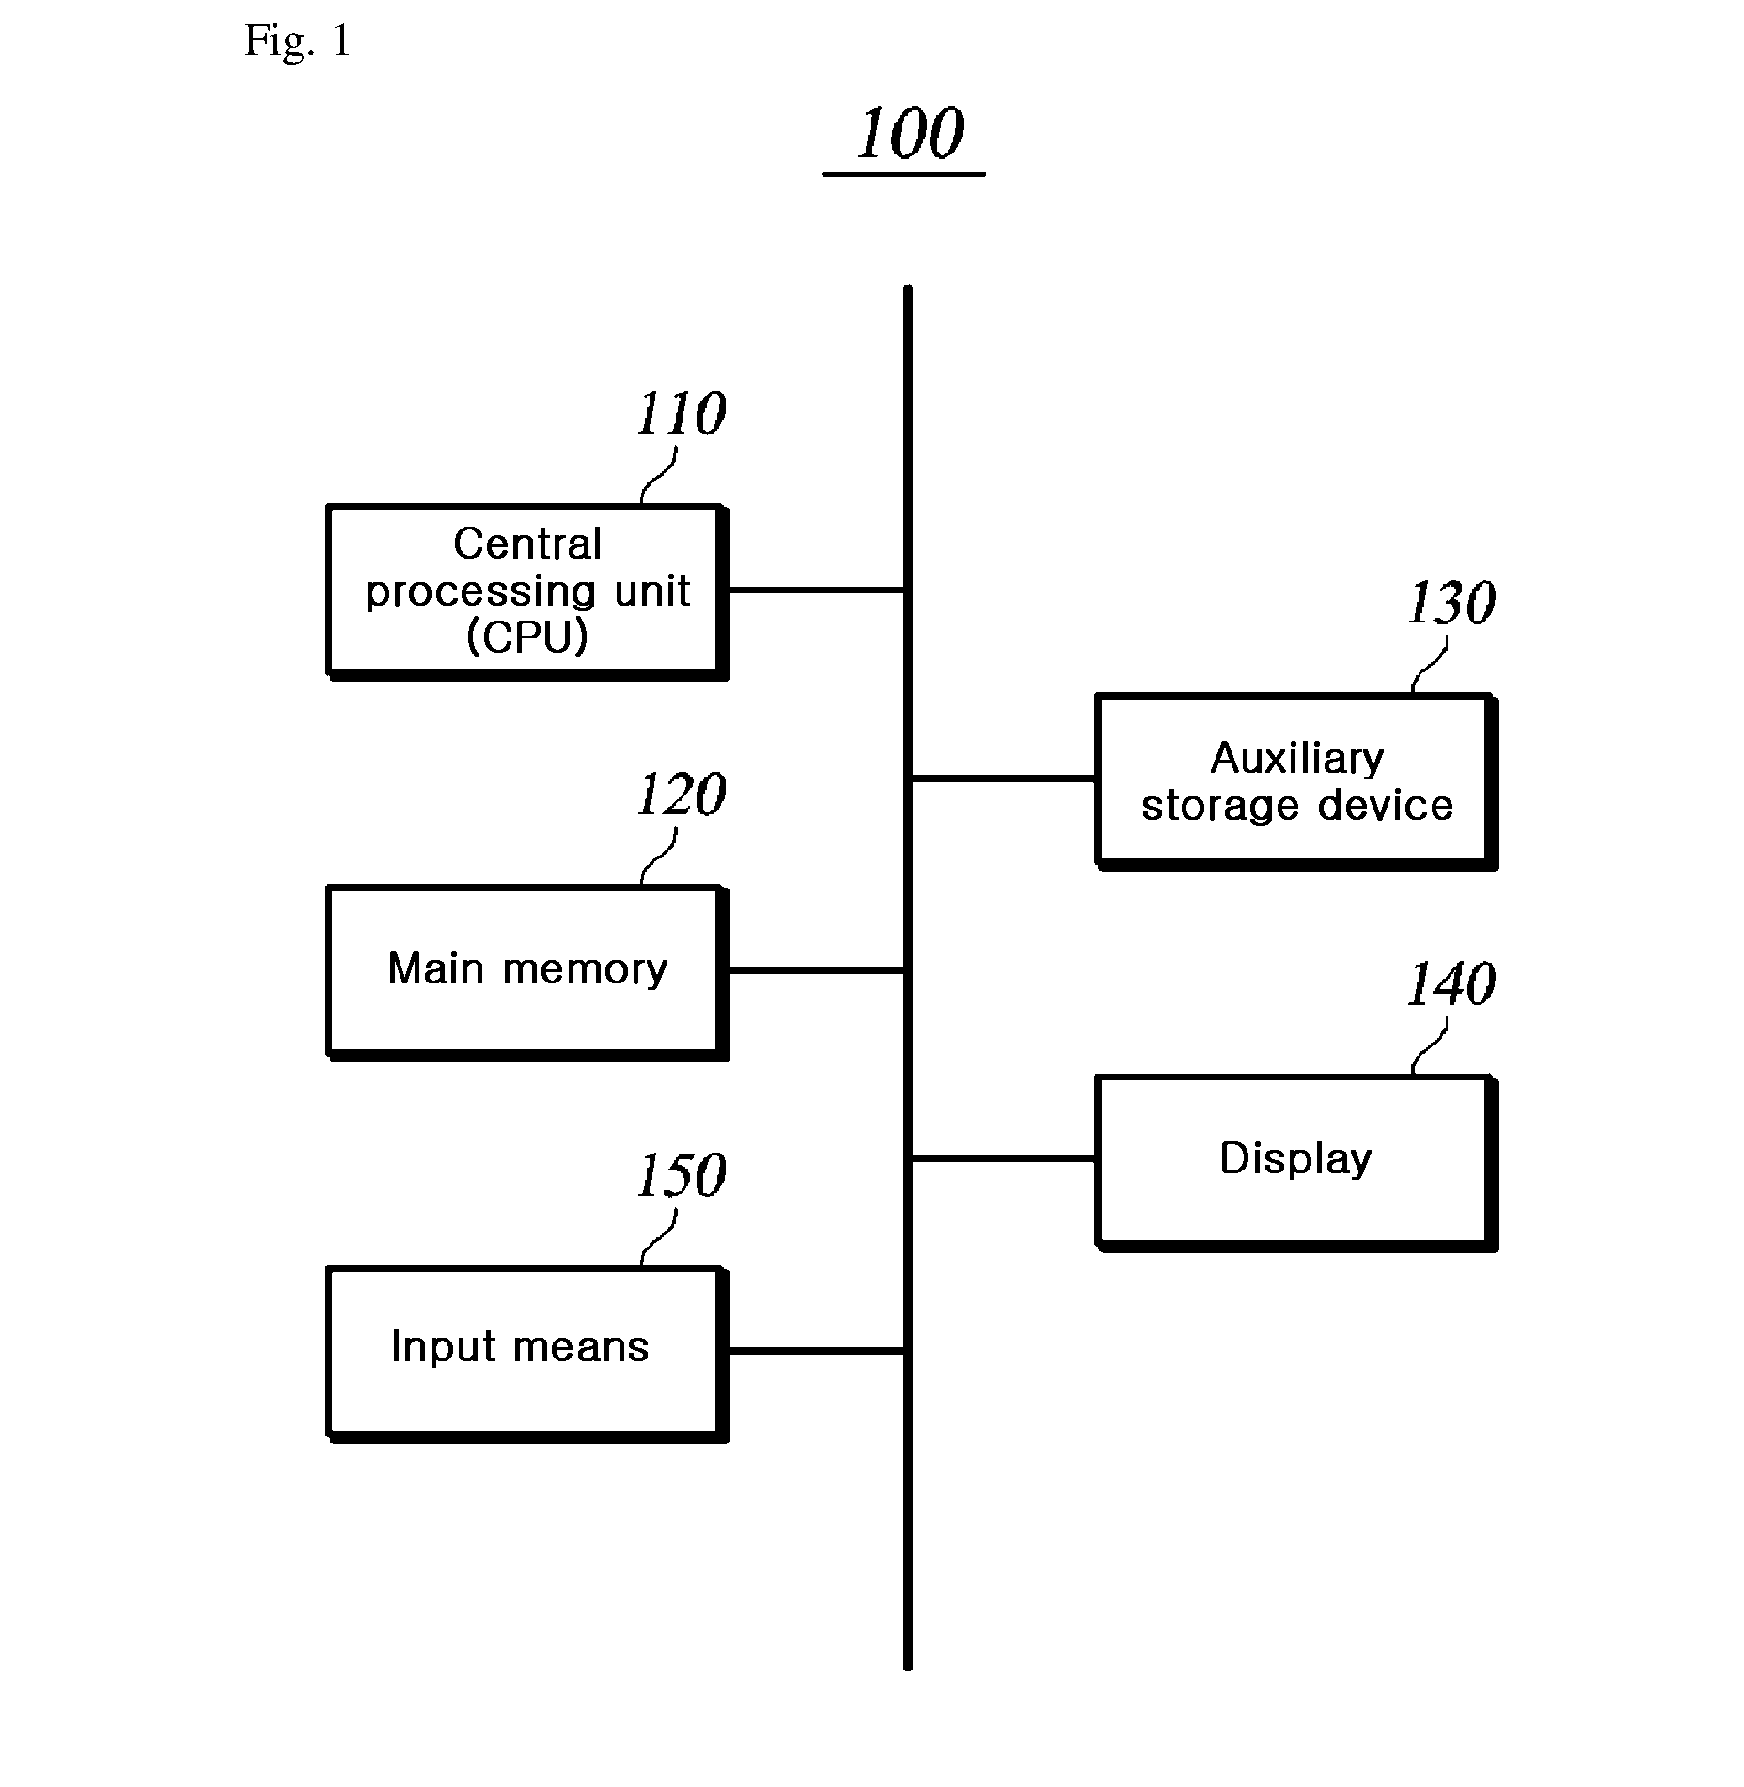 Method and apparatus for protecting dynamic libraries